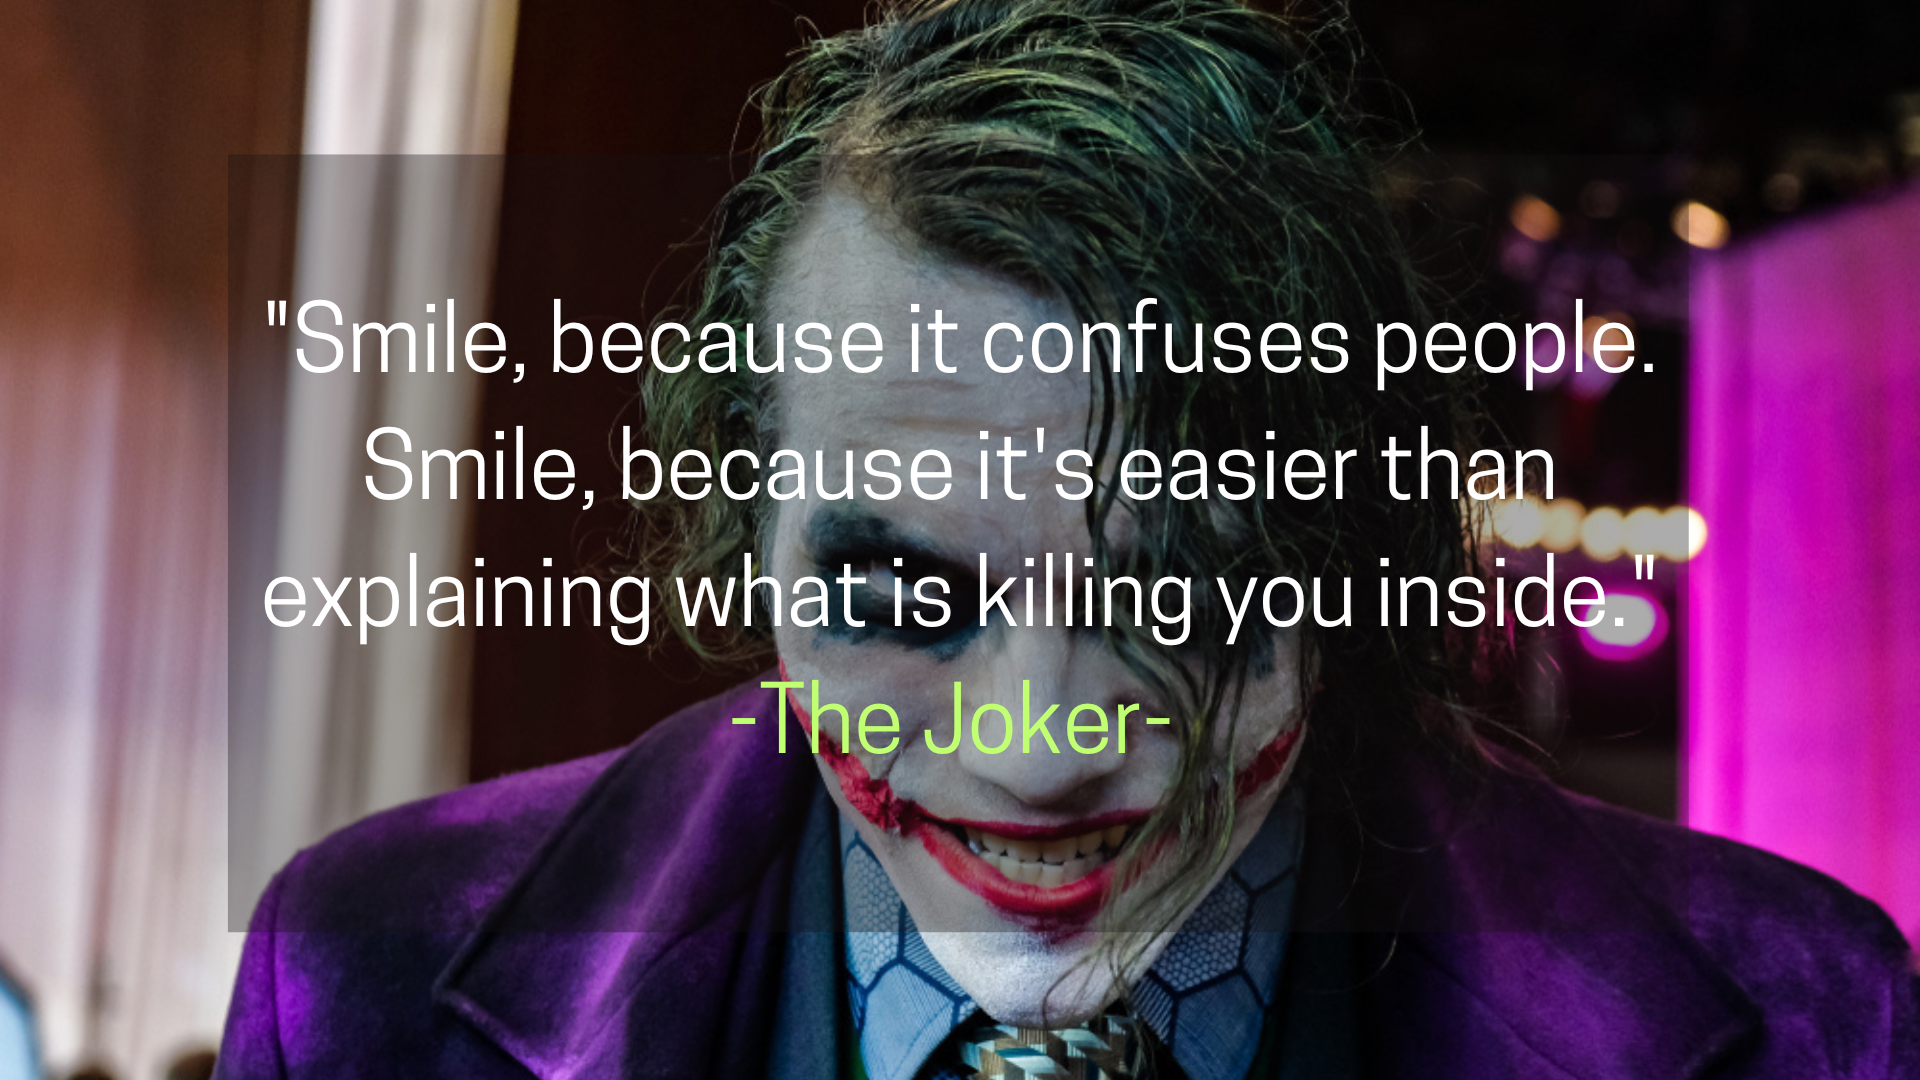 The Joker Quote about smiling